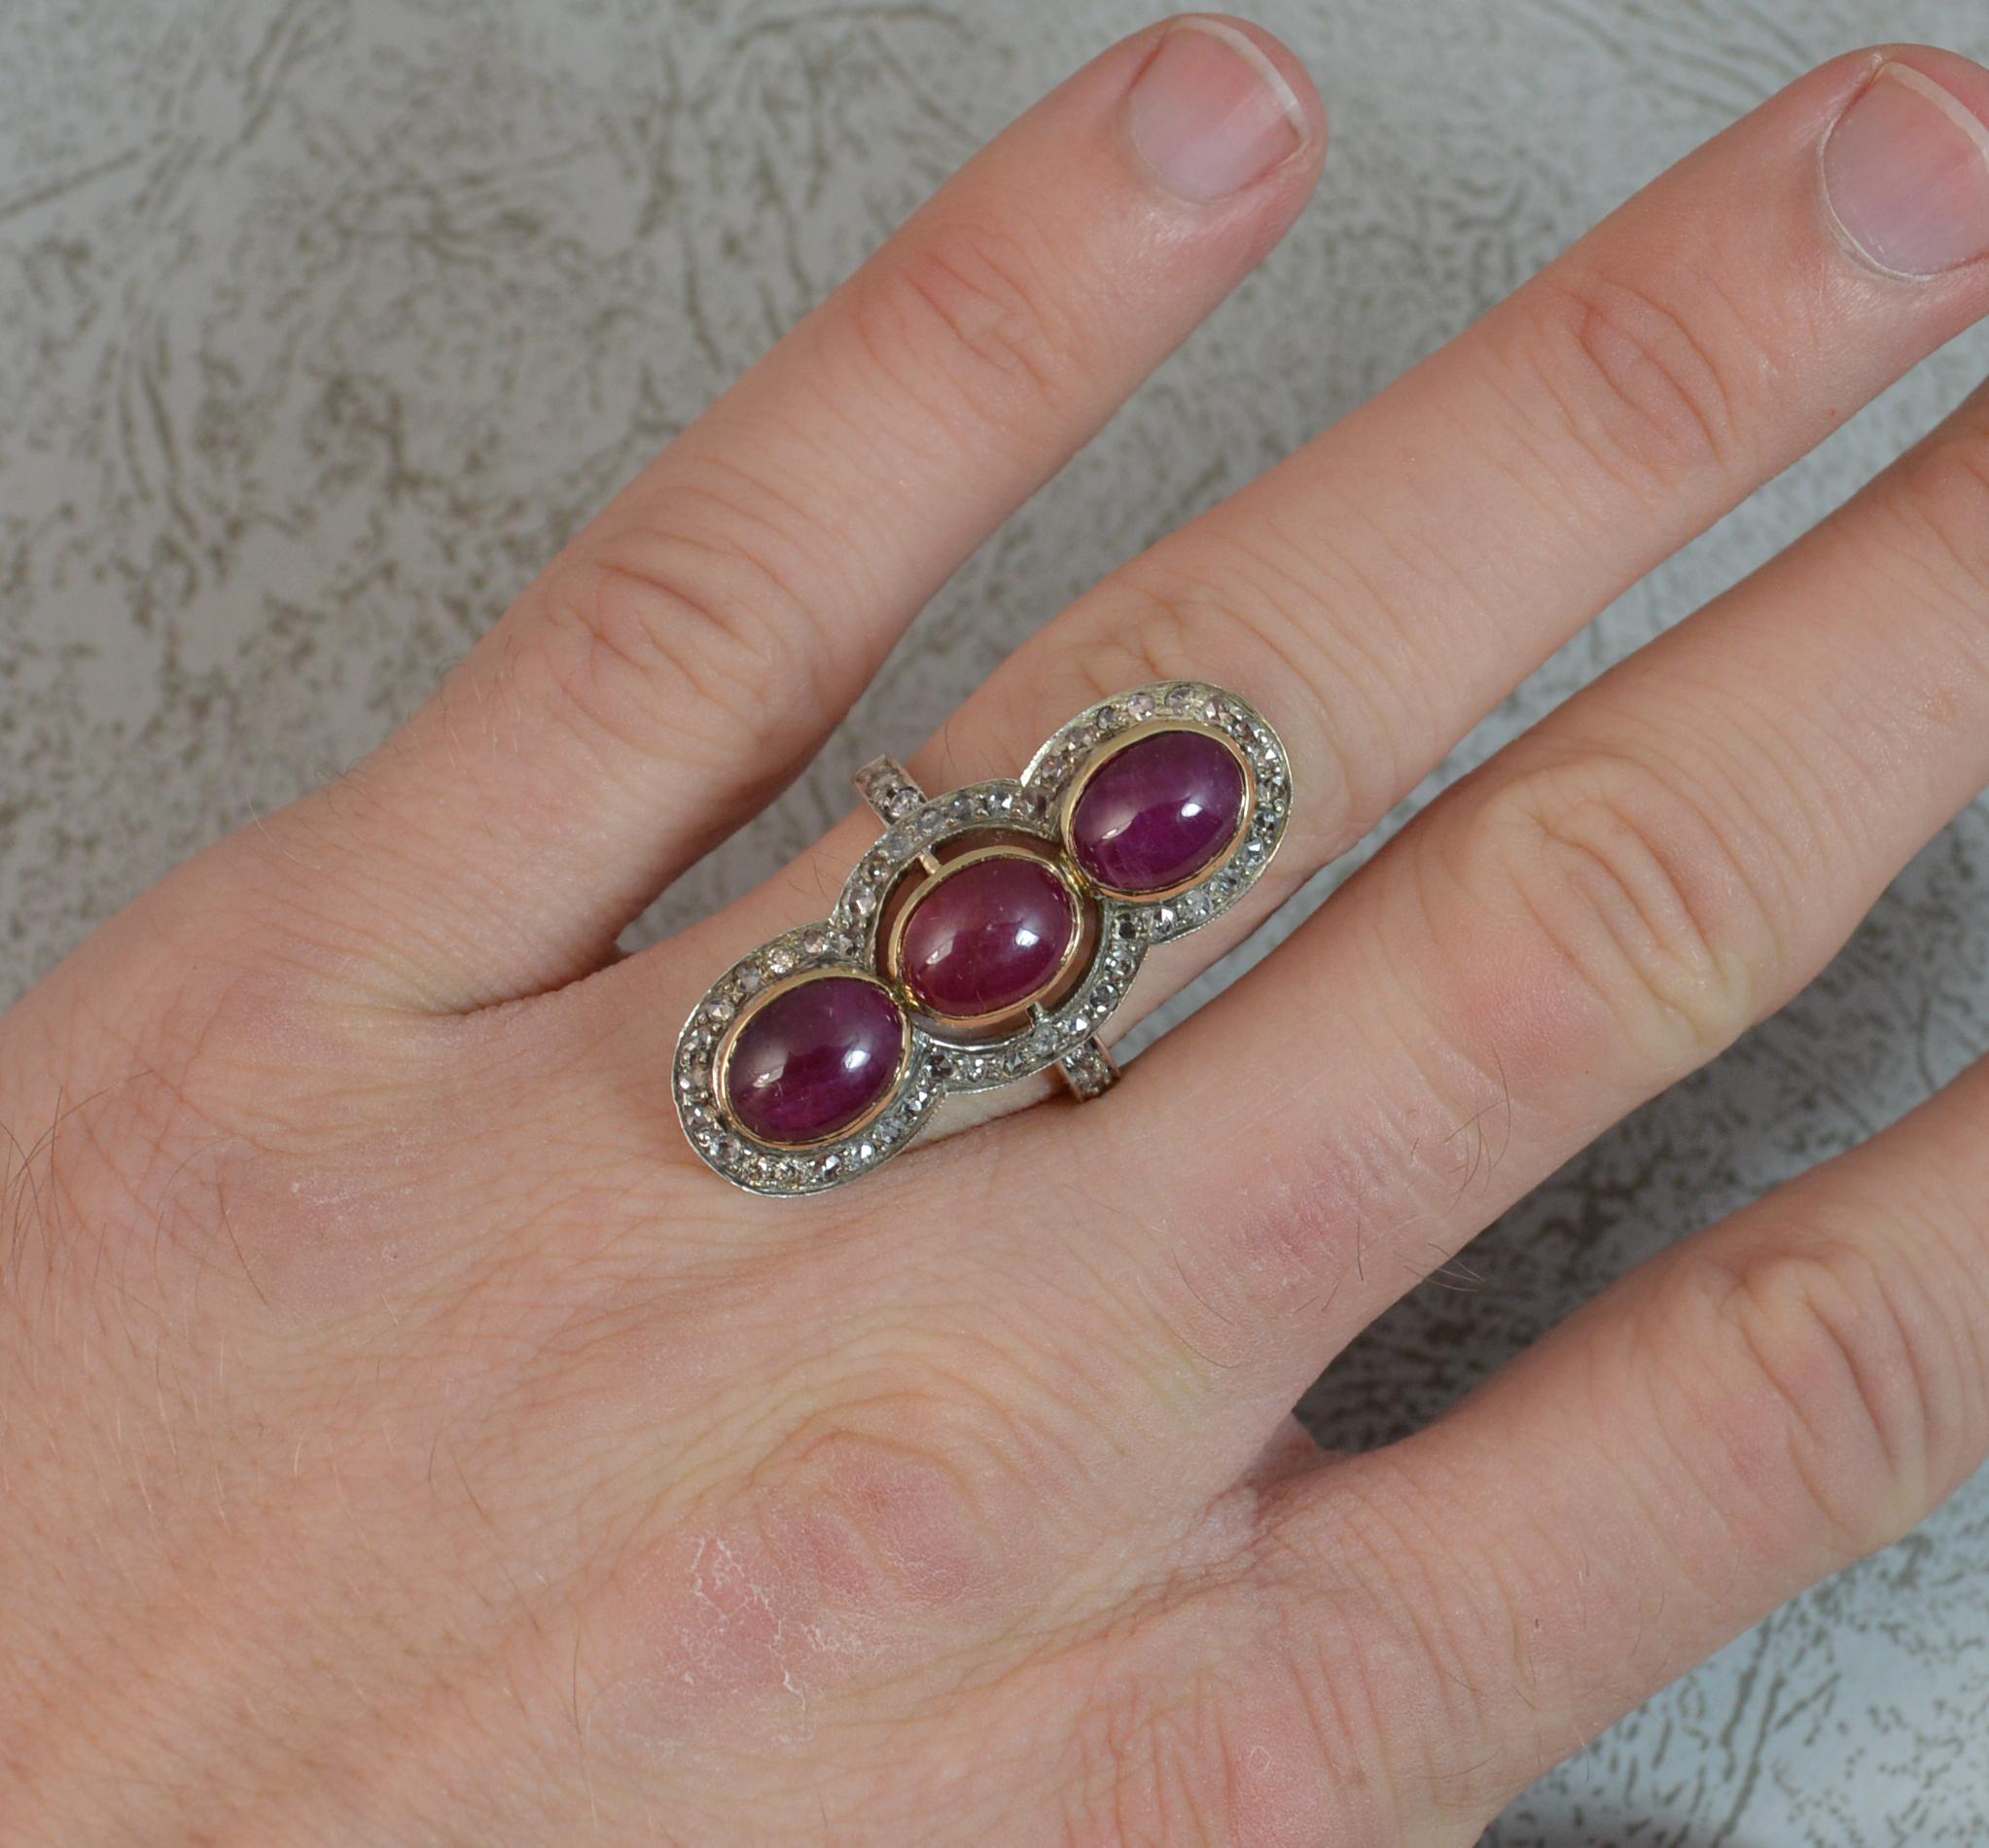 A fantastic vintage cluster or panel ring.
Solid 14 carat gold example.
Large three cluster panel type design.
13mm x 33mm cluster head. Designed with three large oval cabochon ruby stones with a halo of smaller rose cut diamonds surrounding and